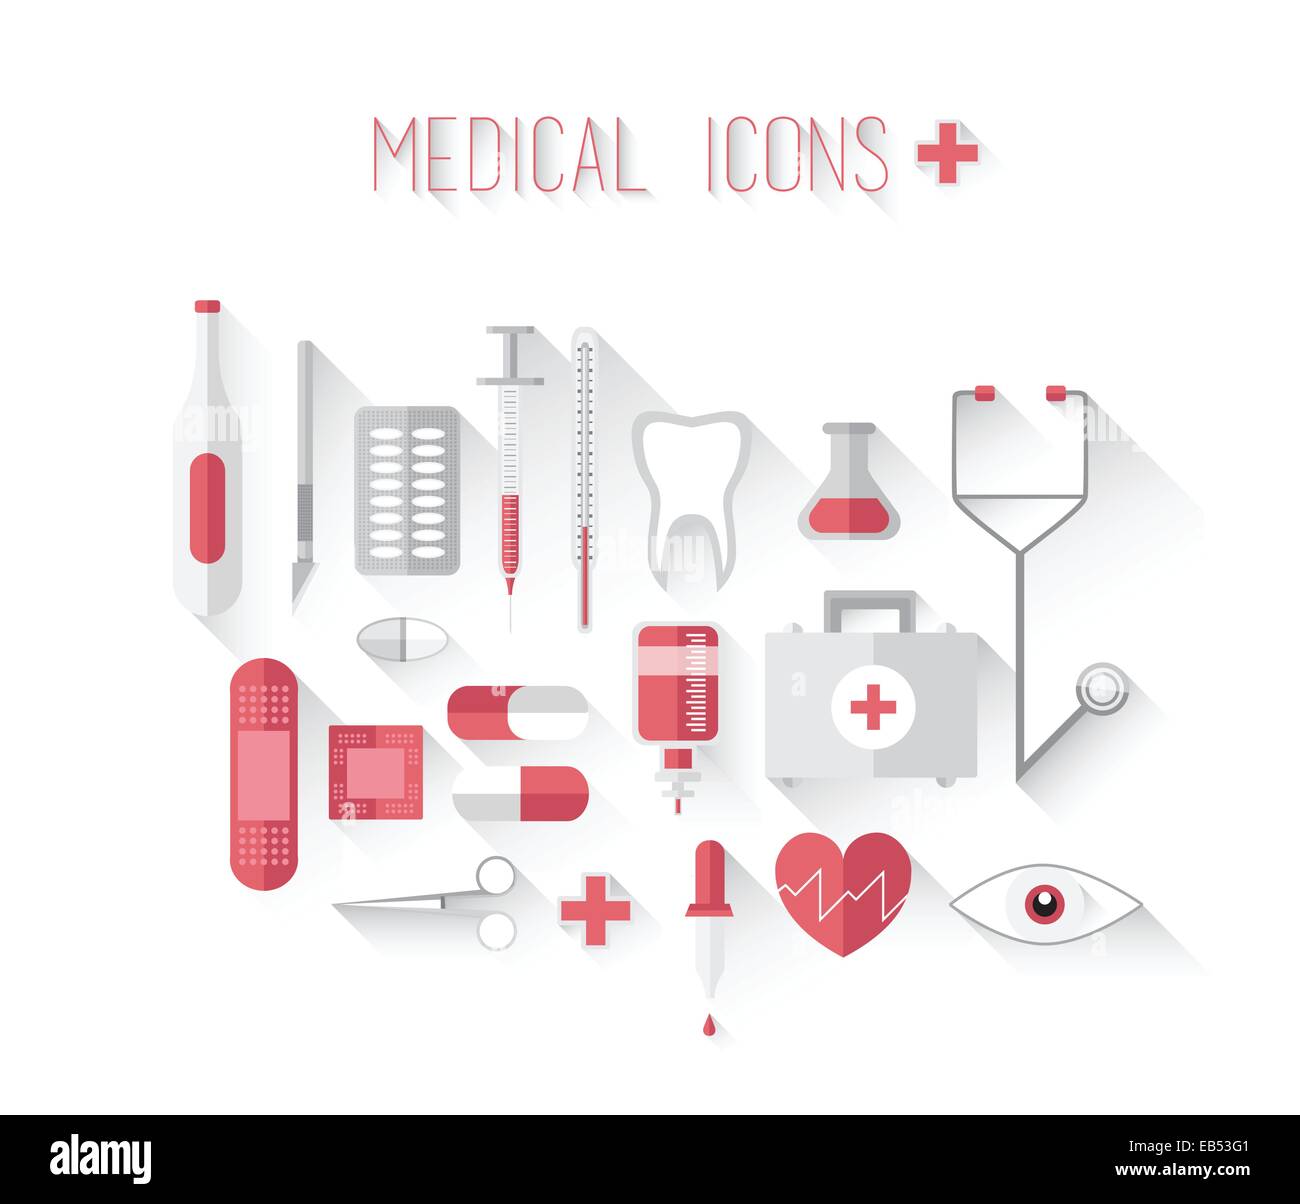 Medical icons in red and grey vector Stock Vector